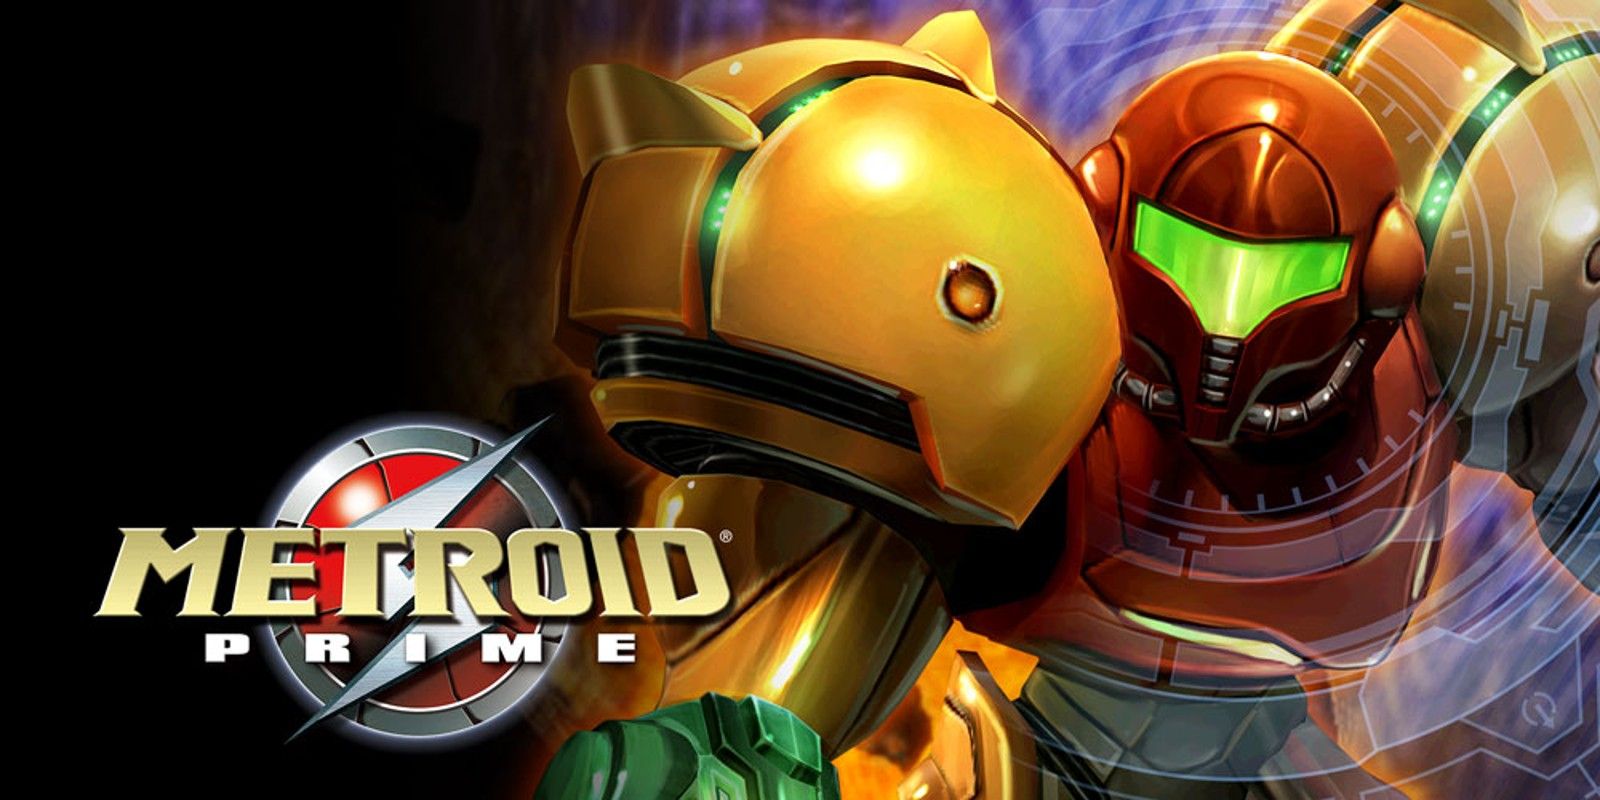 An image of a robot character in Metroid Prime